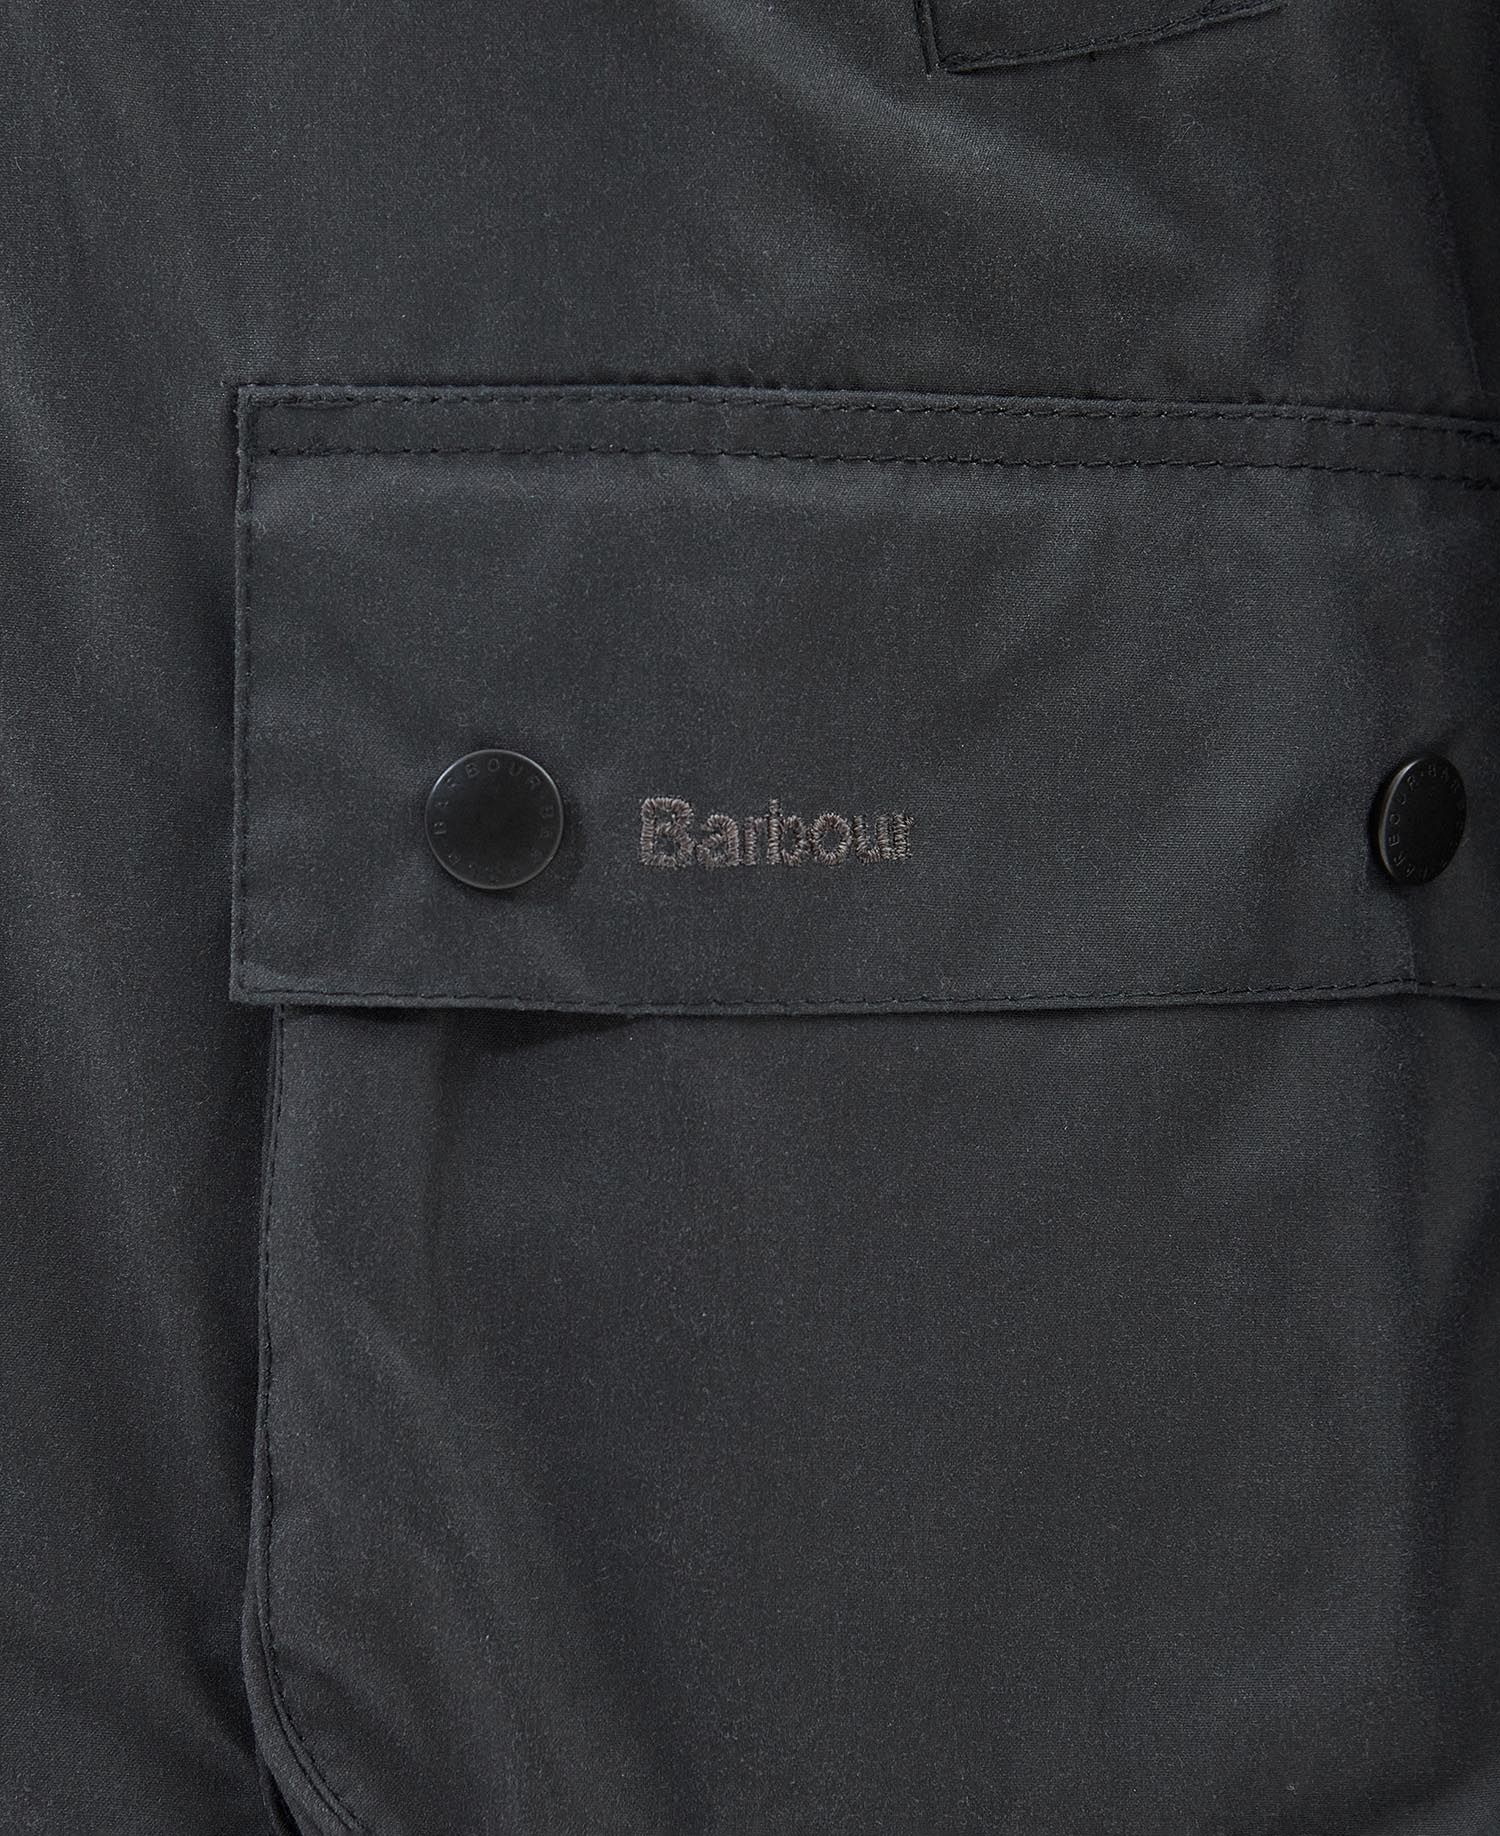 Barbour Ashby Wax Jacket details 2